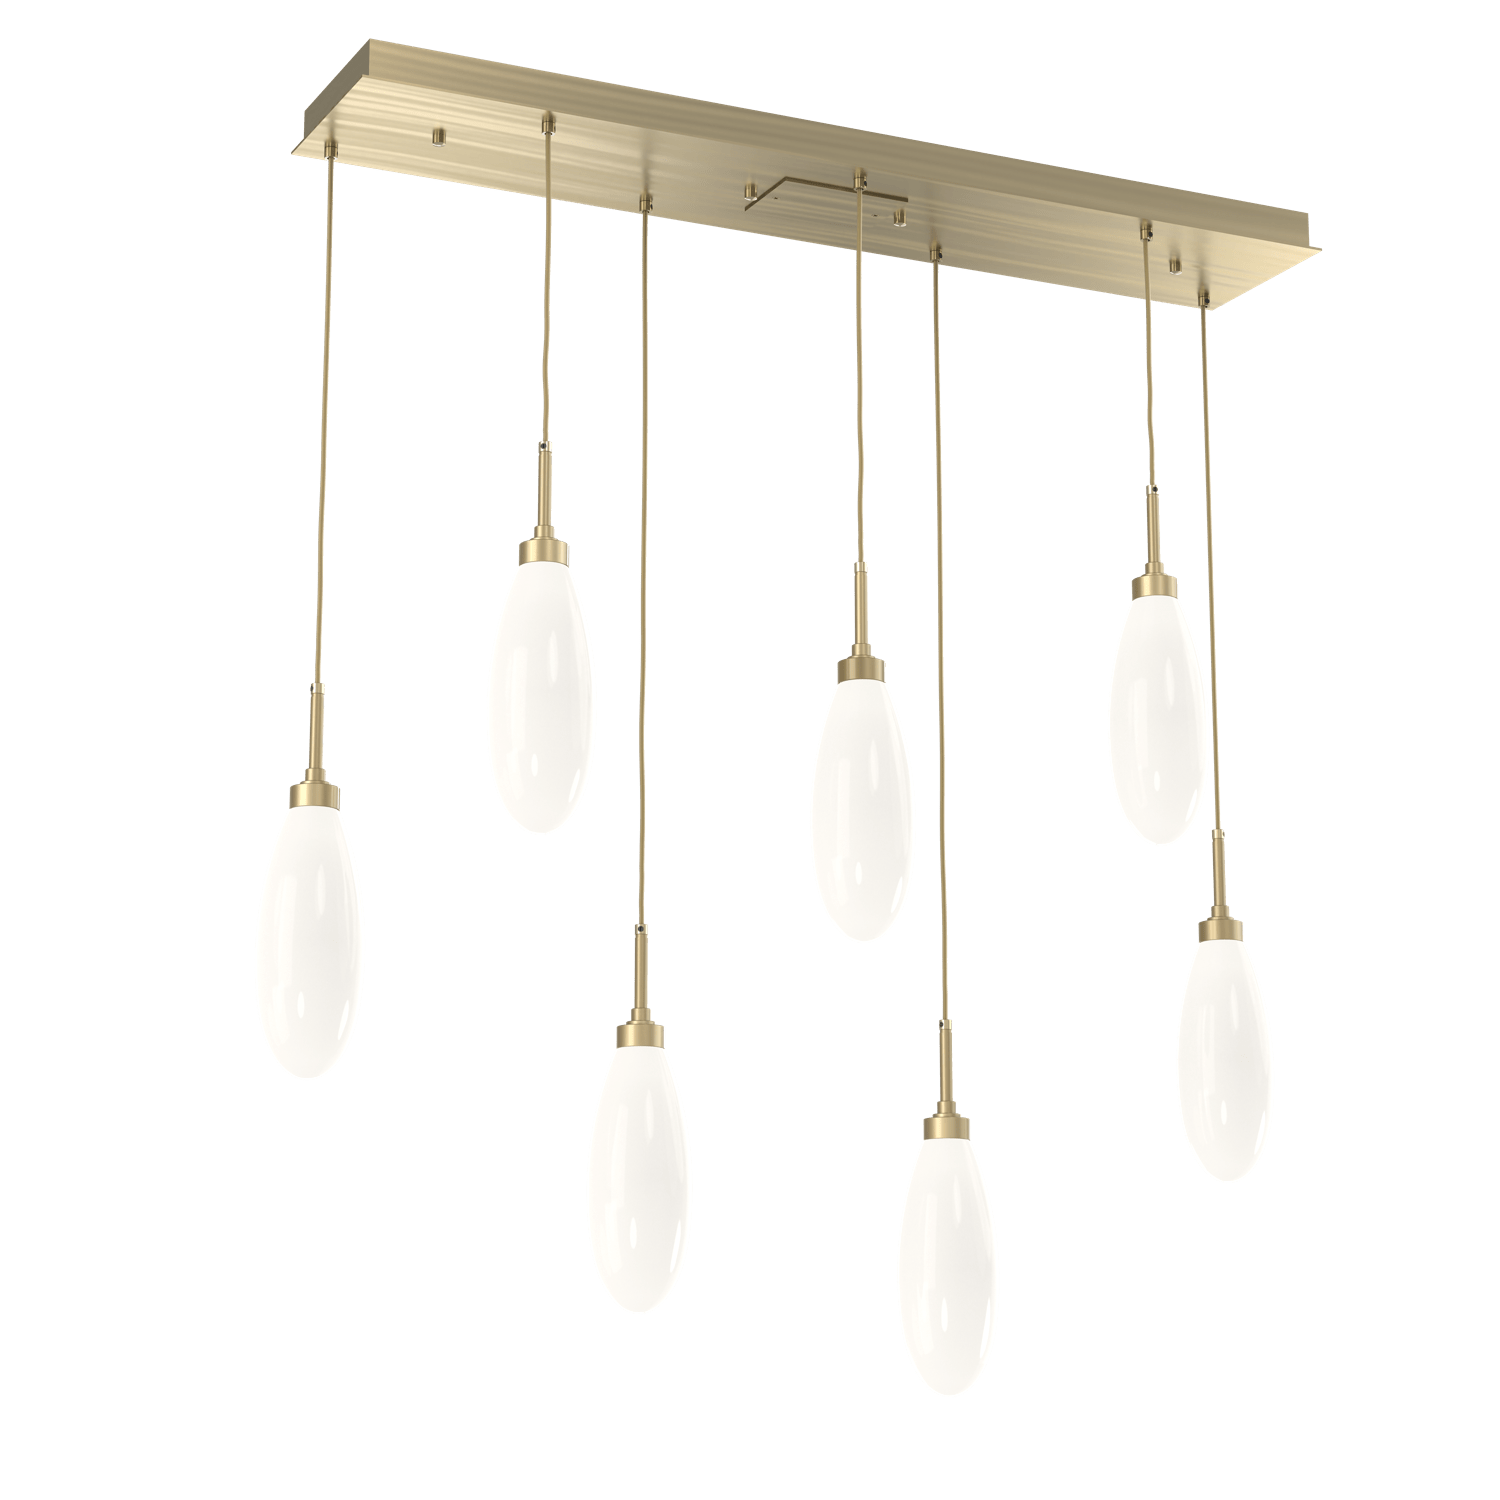 PLB0071-07-HB-WL-LL-Hammerton-Studio-Fiori-7-light-linear-pendant-chandelier-with-heritage-brass-finish-and-opal-white-glass-shades-and-LED-lamping